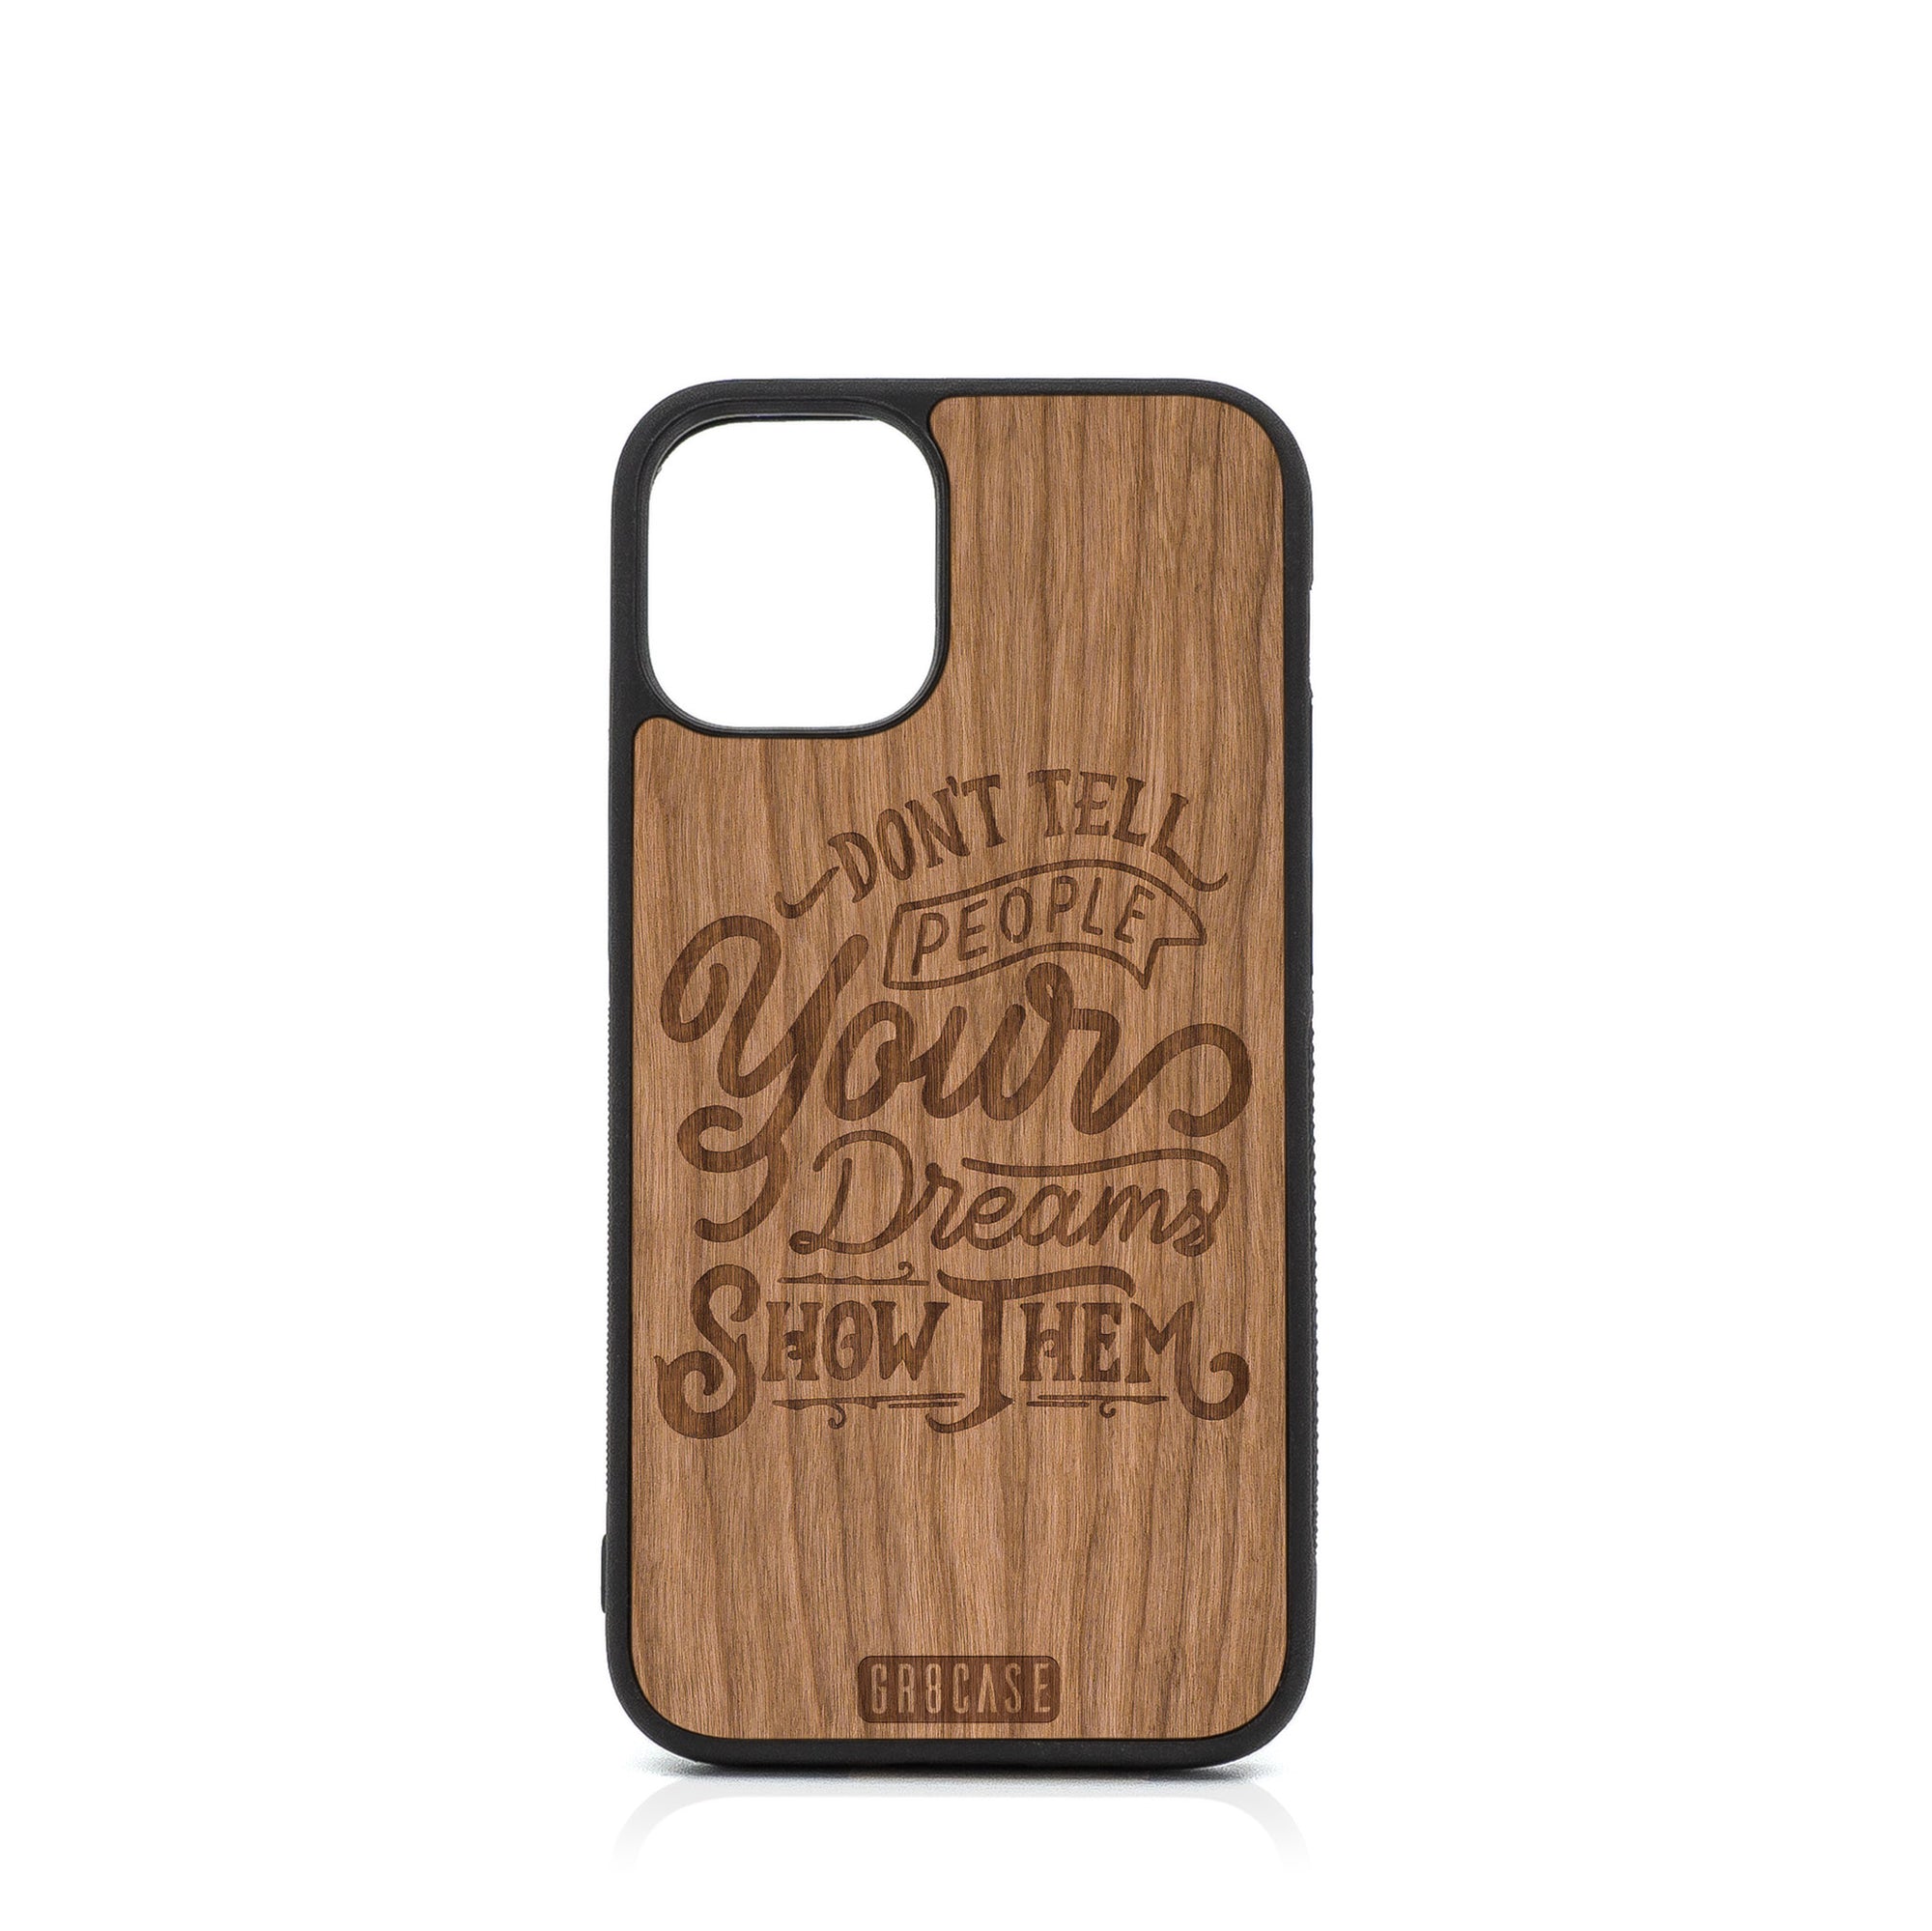 Don't Tell People Your Dreams Show Them Design Wood Case For iPhone 12 Mini